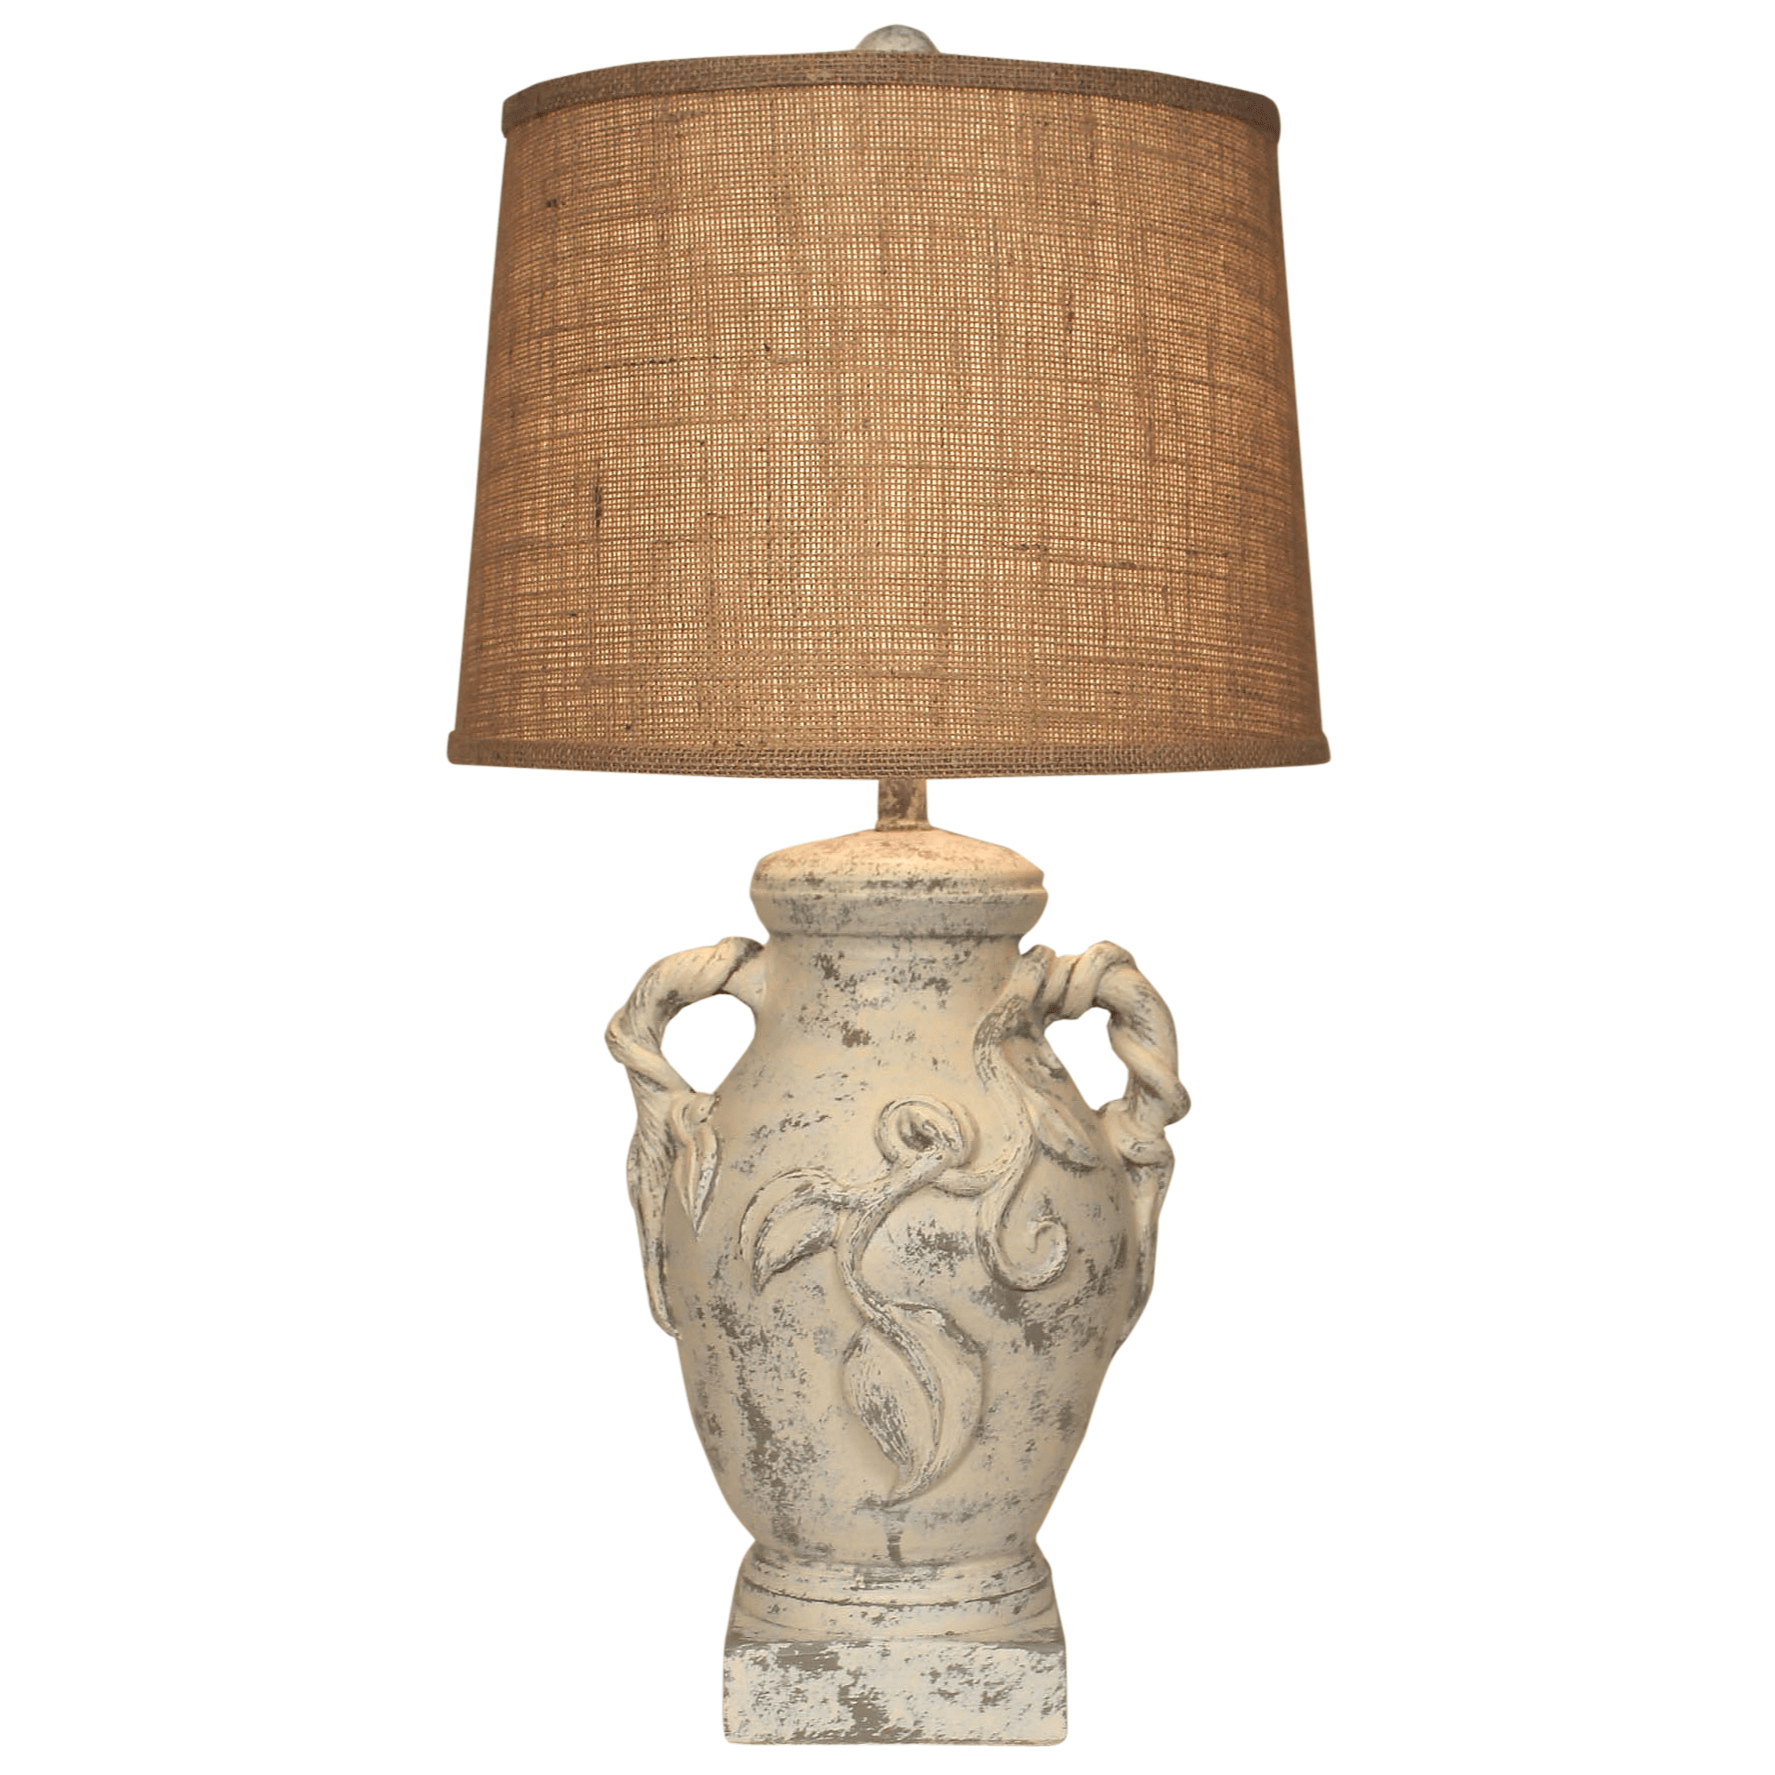 2-Handle Pot Table Lamp with Vines